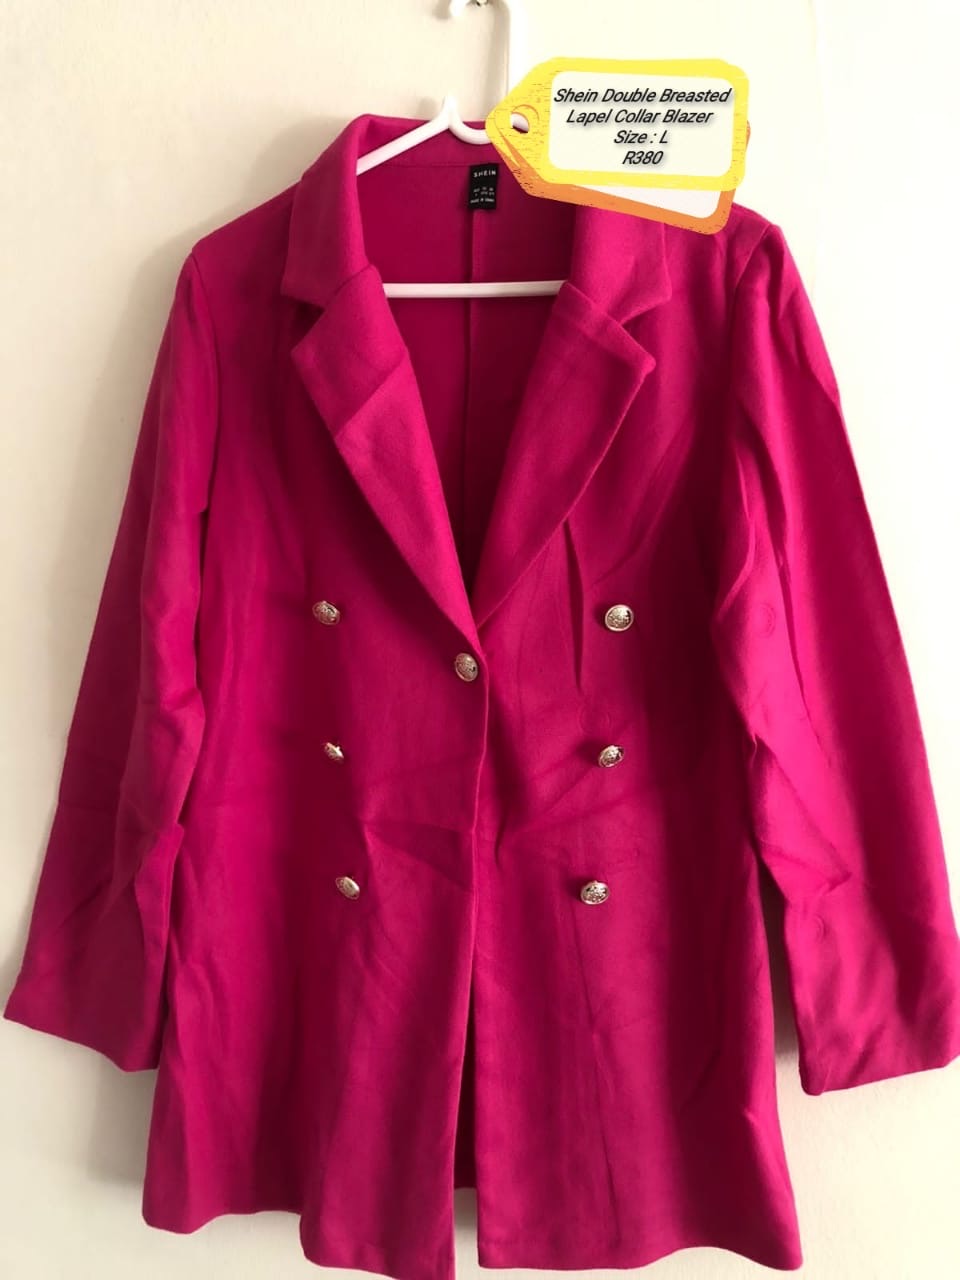 Image of Shein Double Breasted Lapel Collar Blazer. A Large but can fit a size M